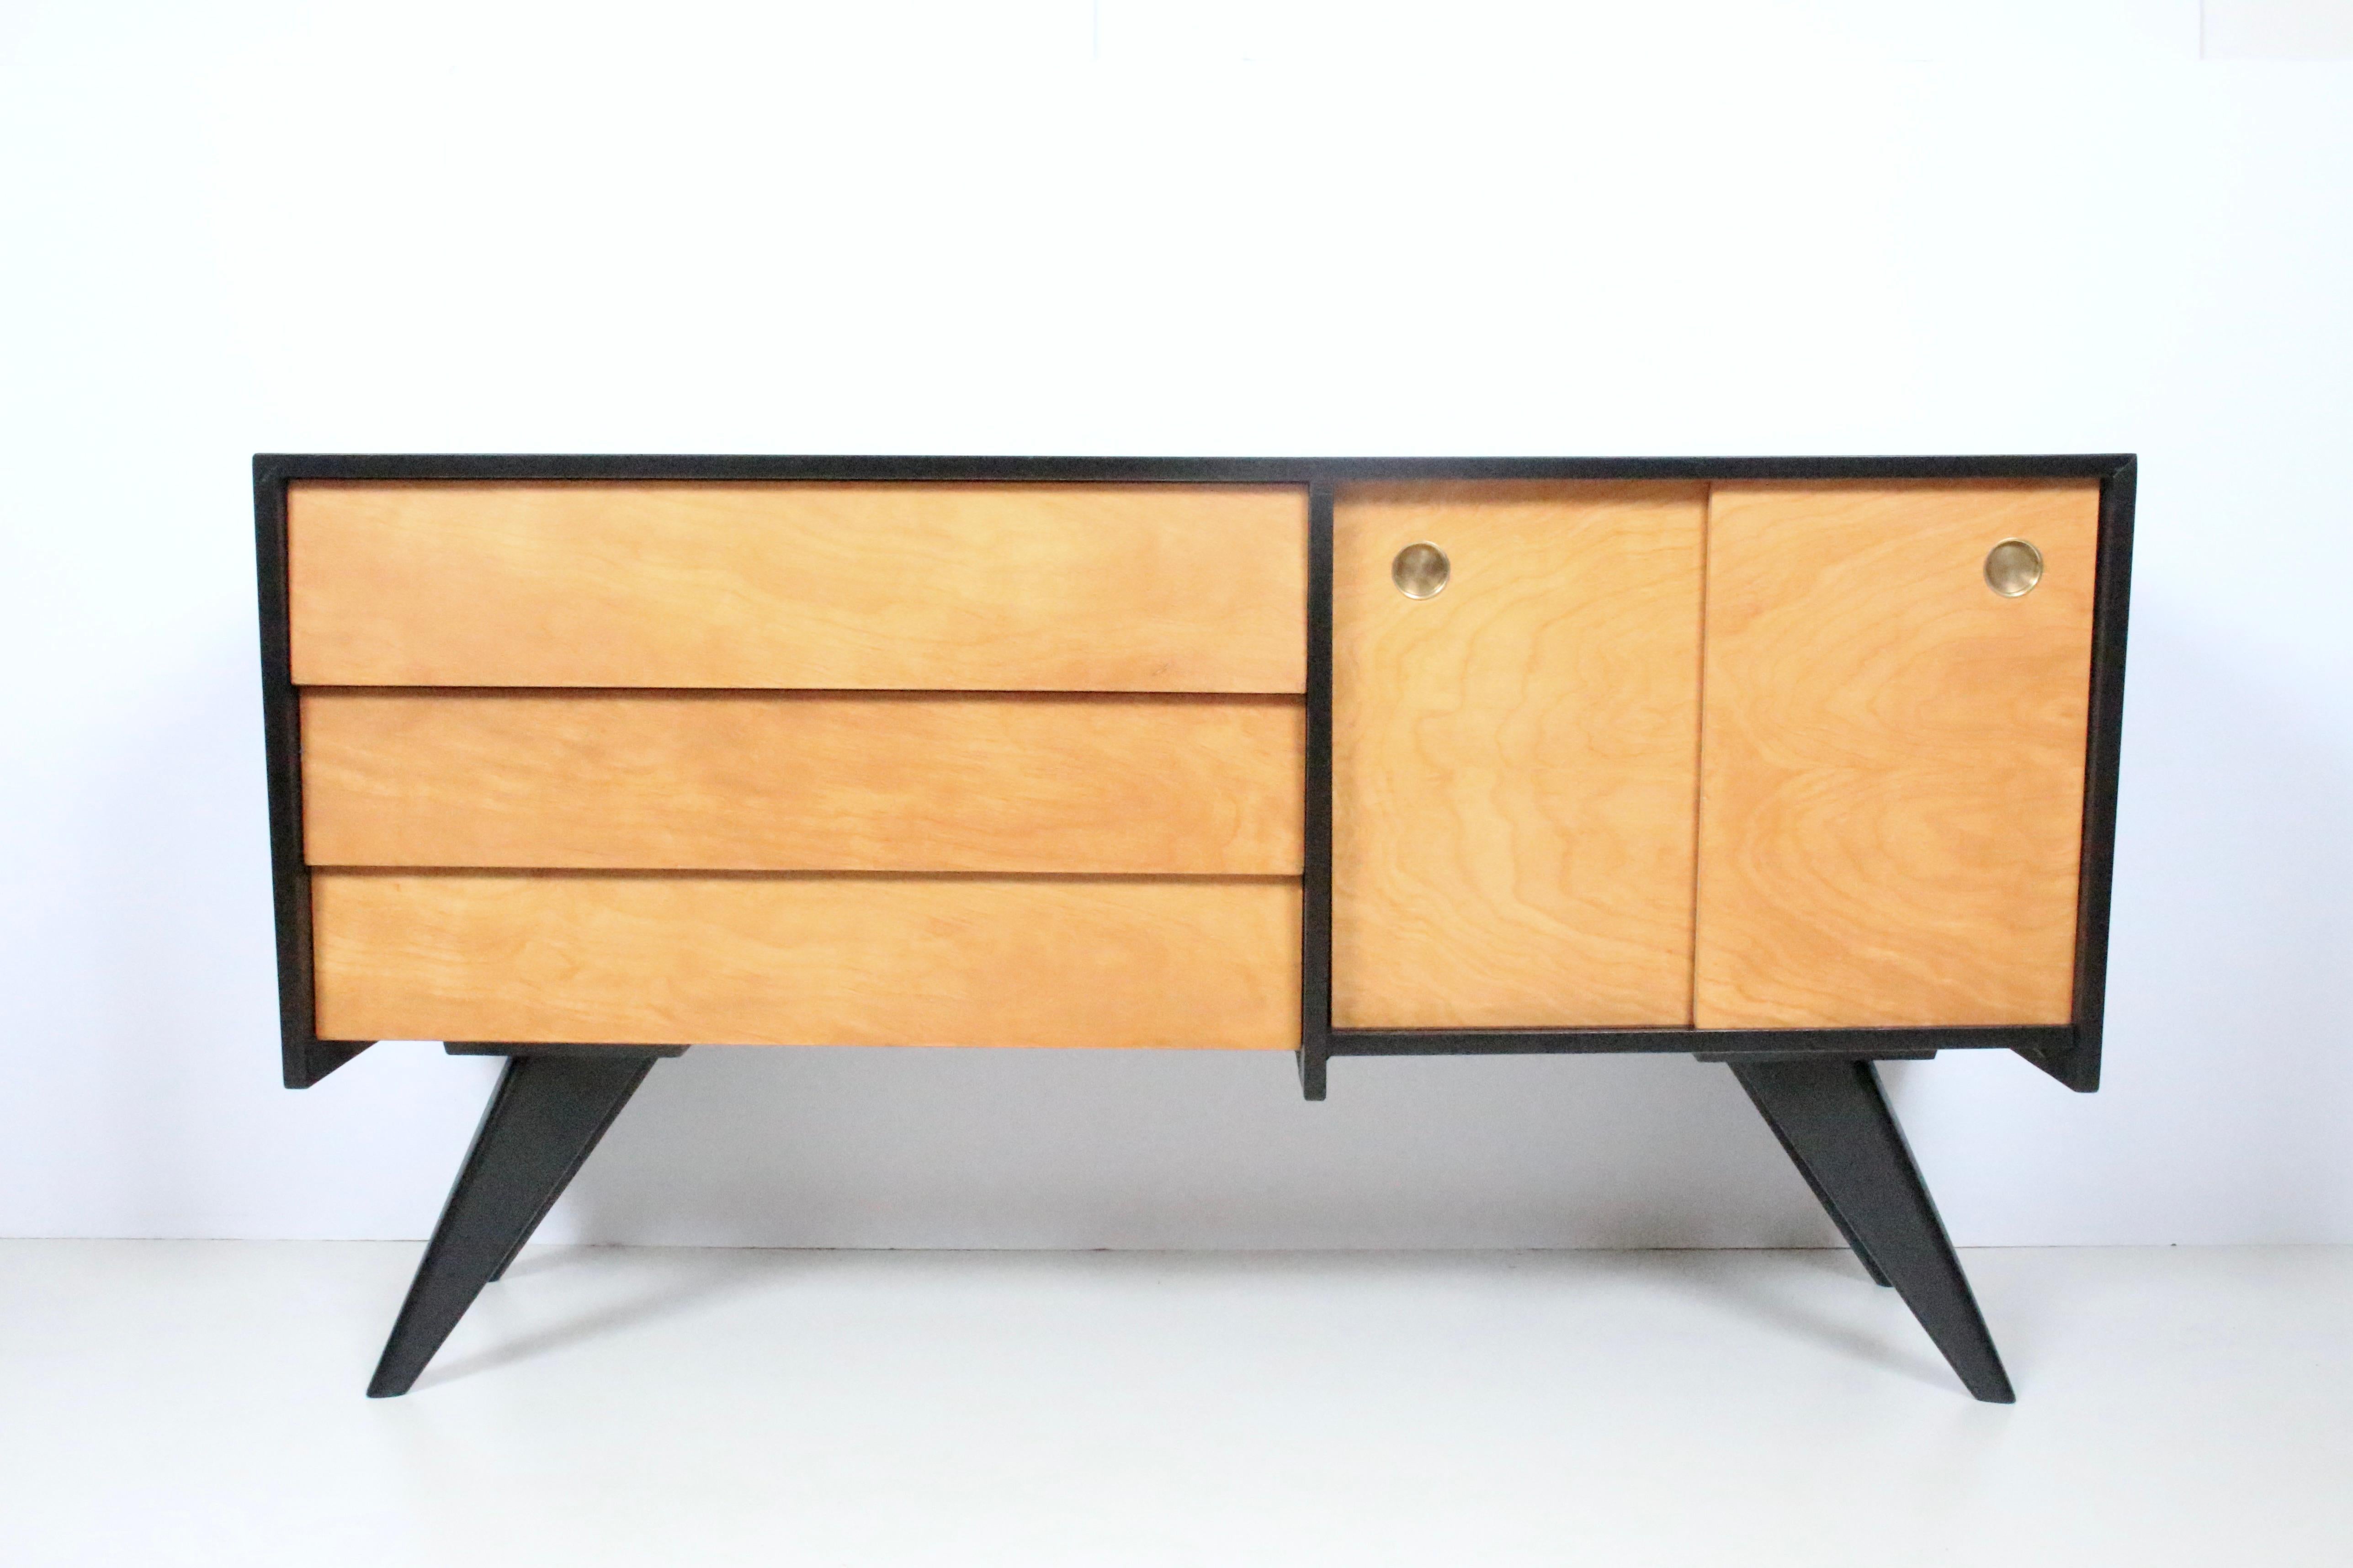 1952 designed Russell Spanner Catalina Series Server, Cabinet, Dresser for Ruspan of Toronto, Canada.  Featuring a rectangular black lacquered Maple form, on 4 splayed legs, 2 sliding doors with black interior, and 3 overlapping drawers.  Solid.